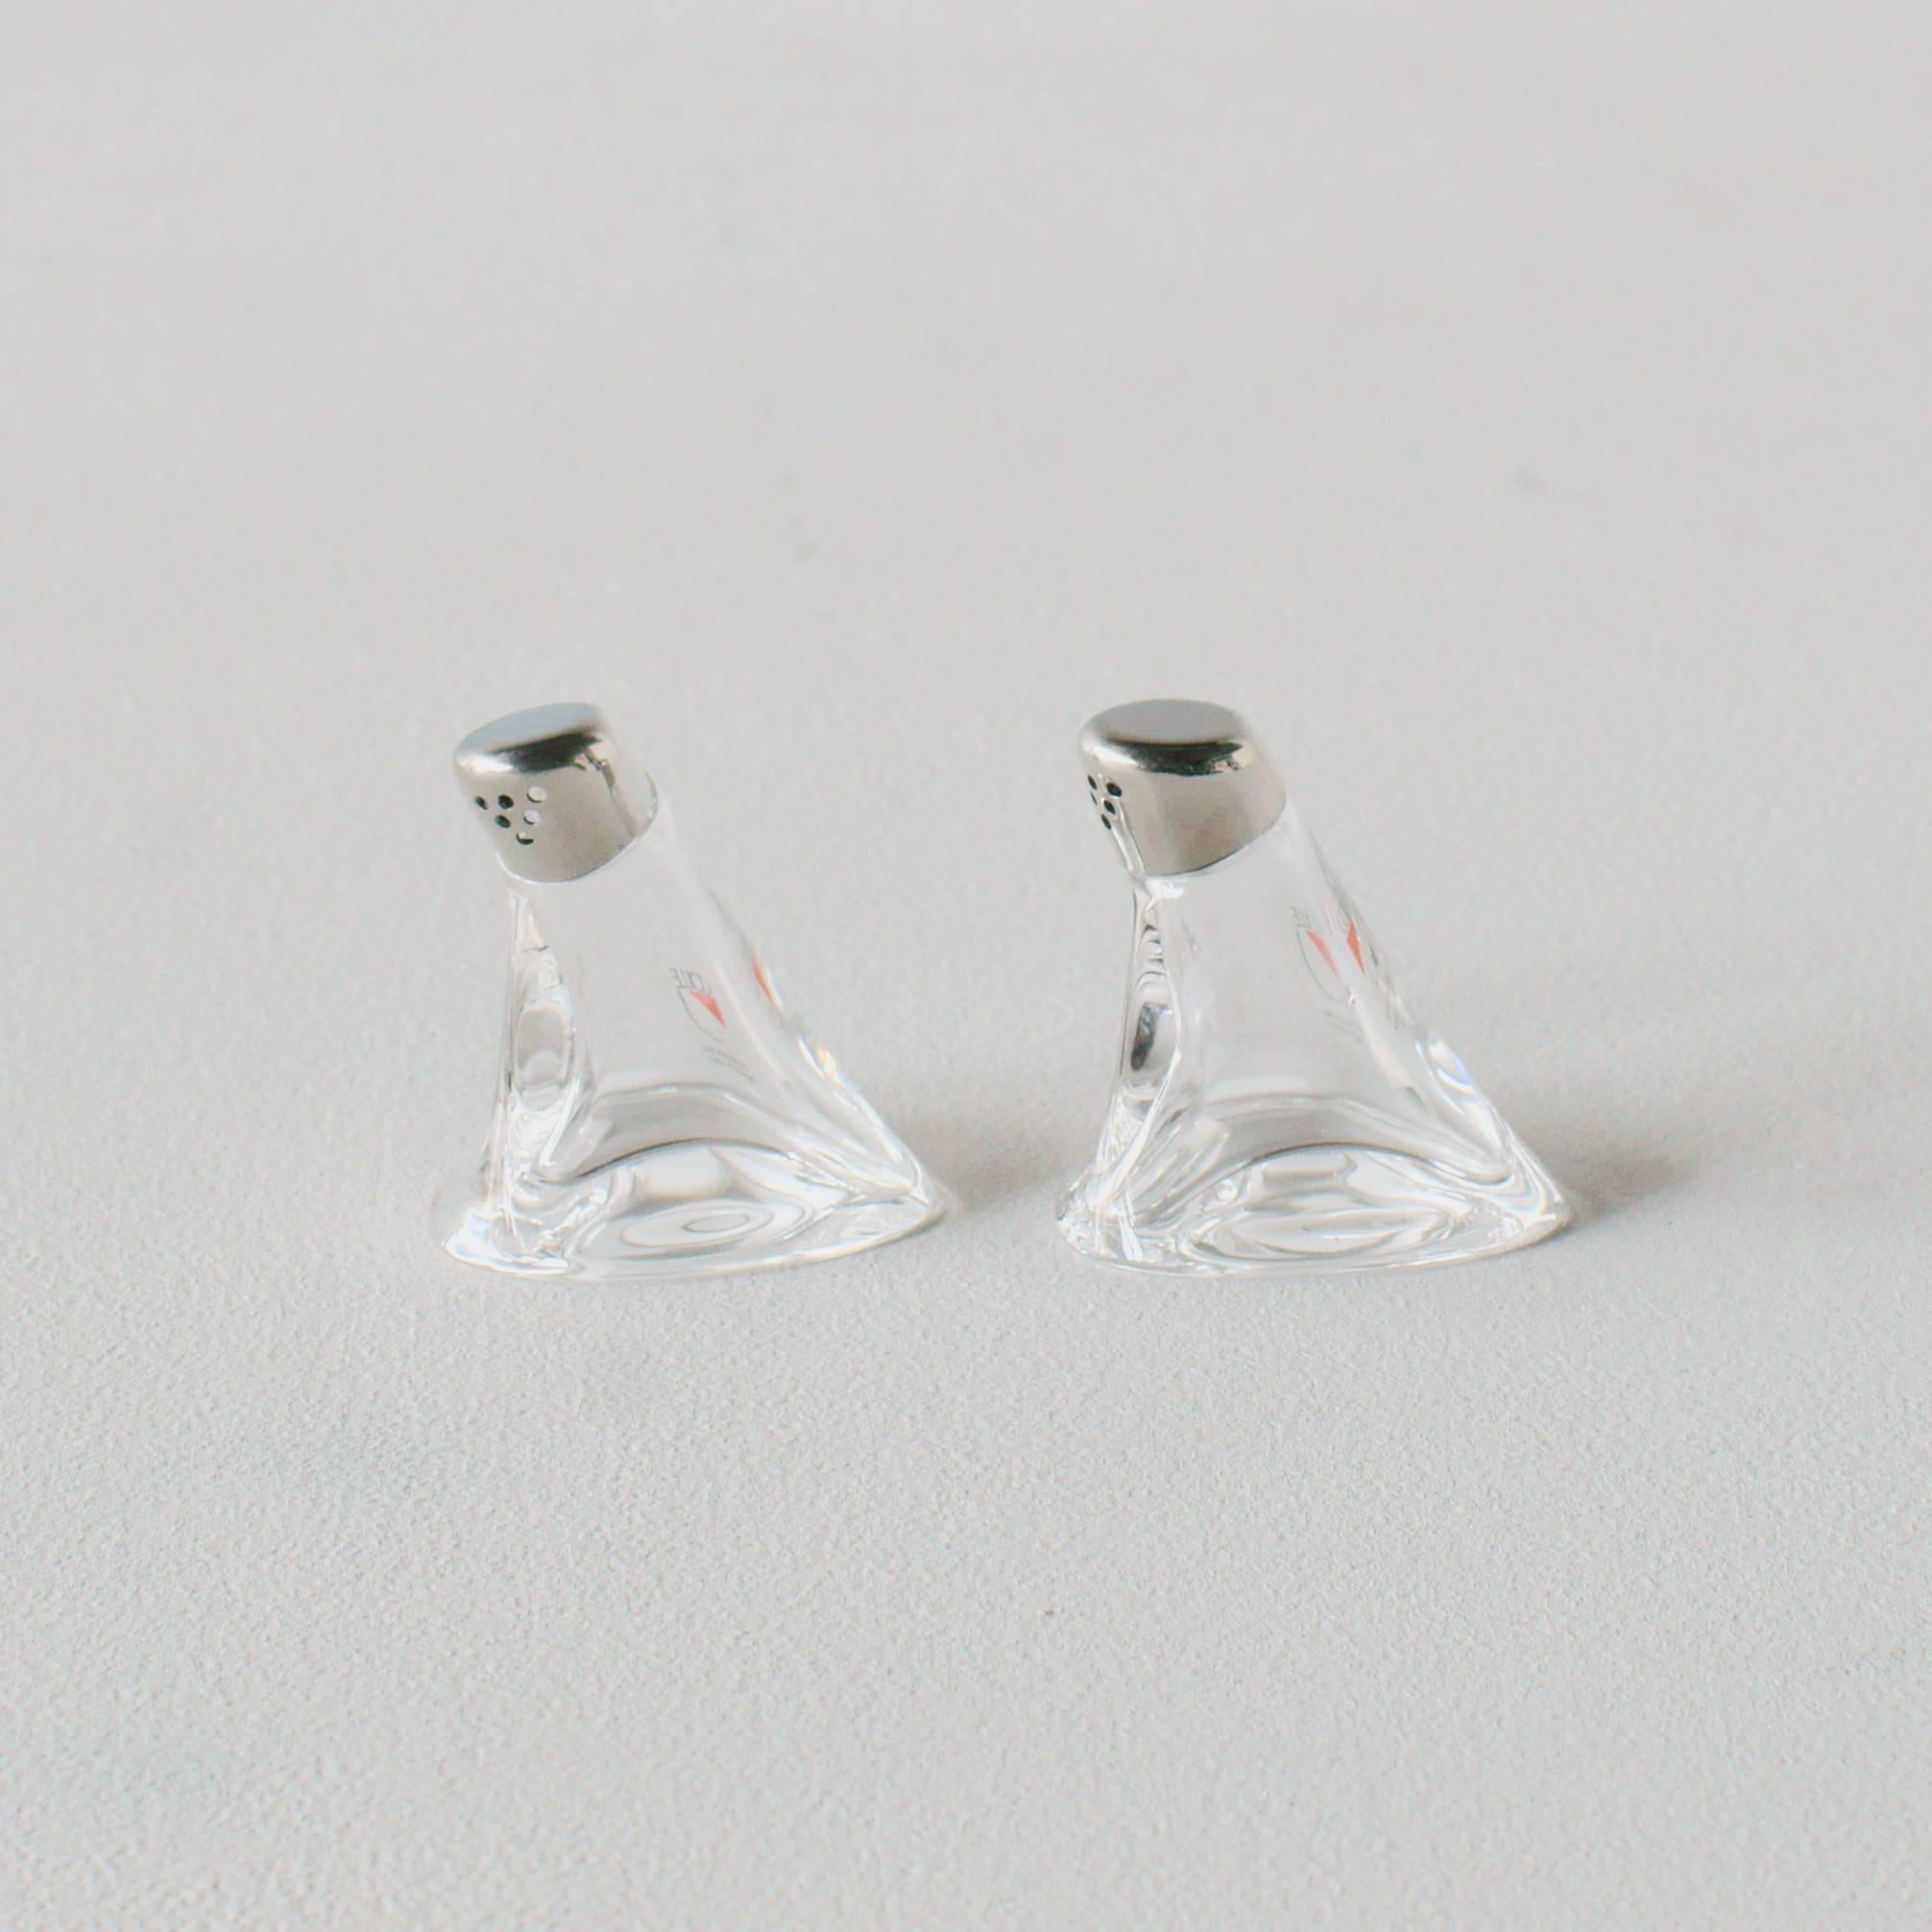 Salt and pepper produced by Colle. Never used, MIB.